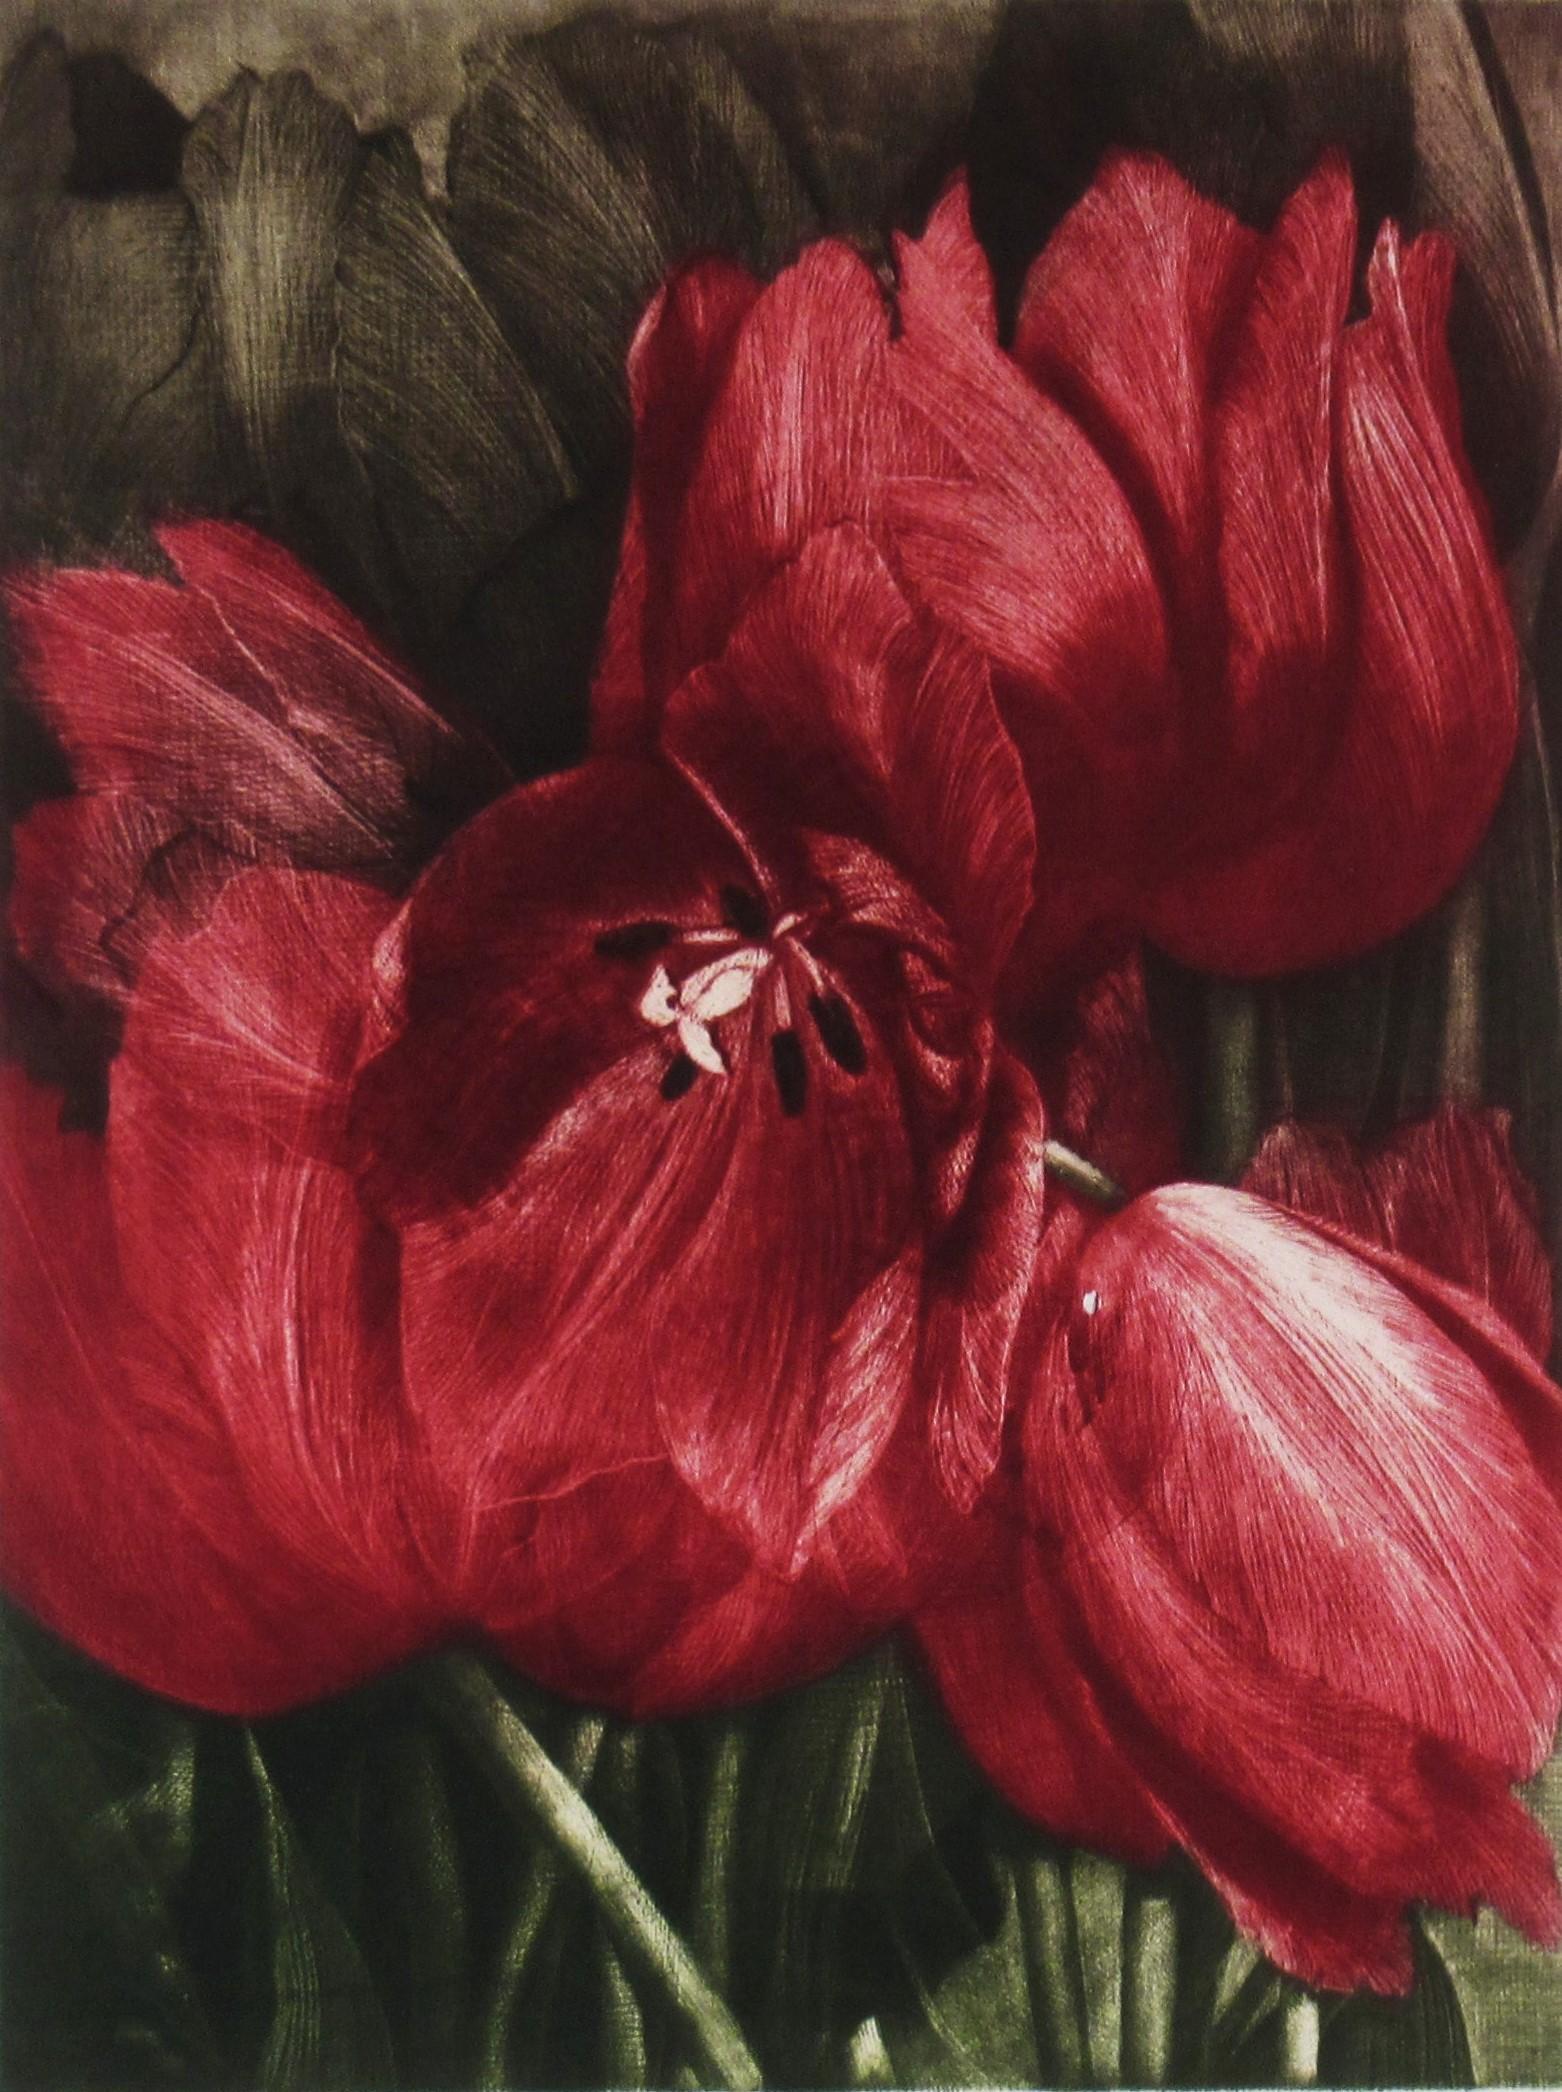 Some of 48 Tulips - Print by Gatja Helgart Rothe